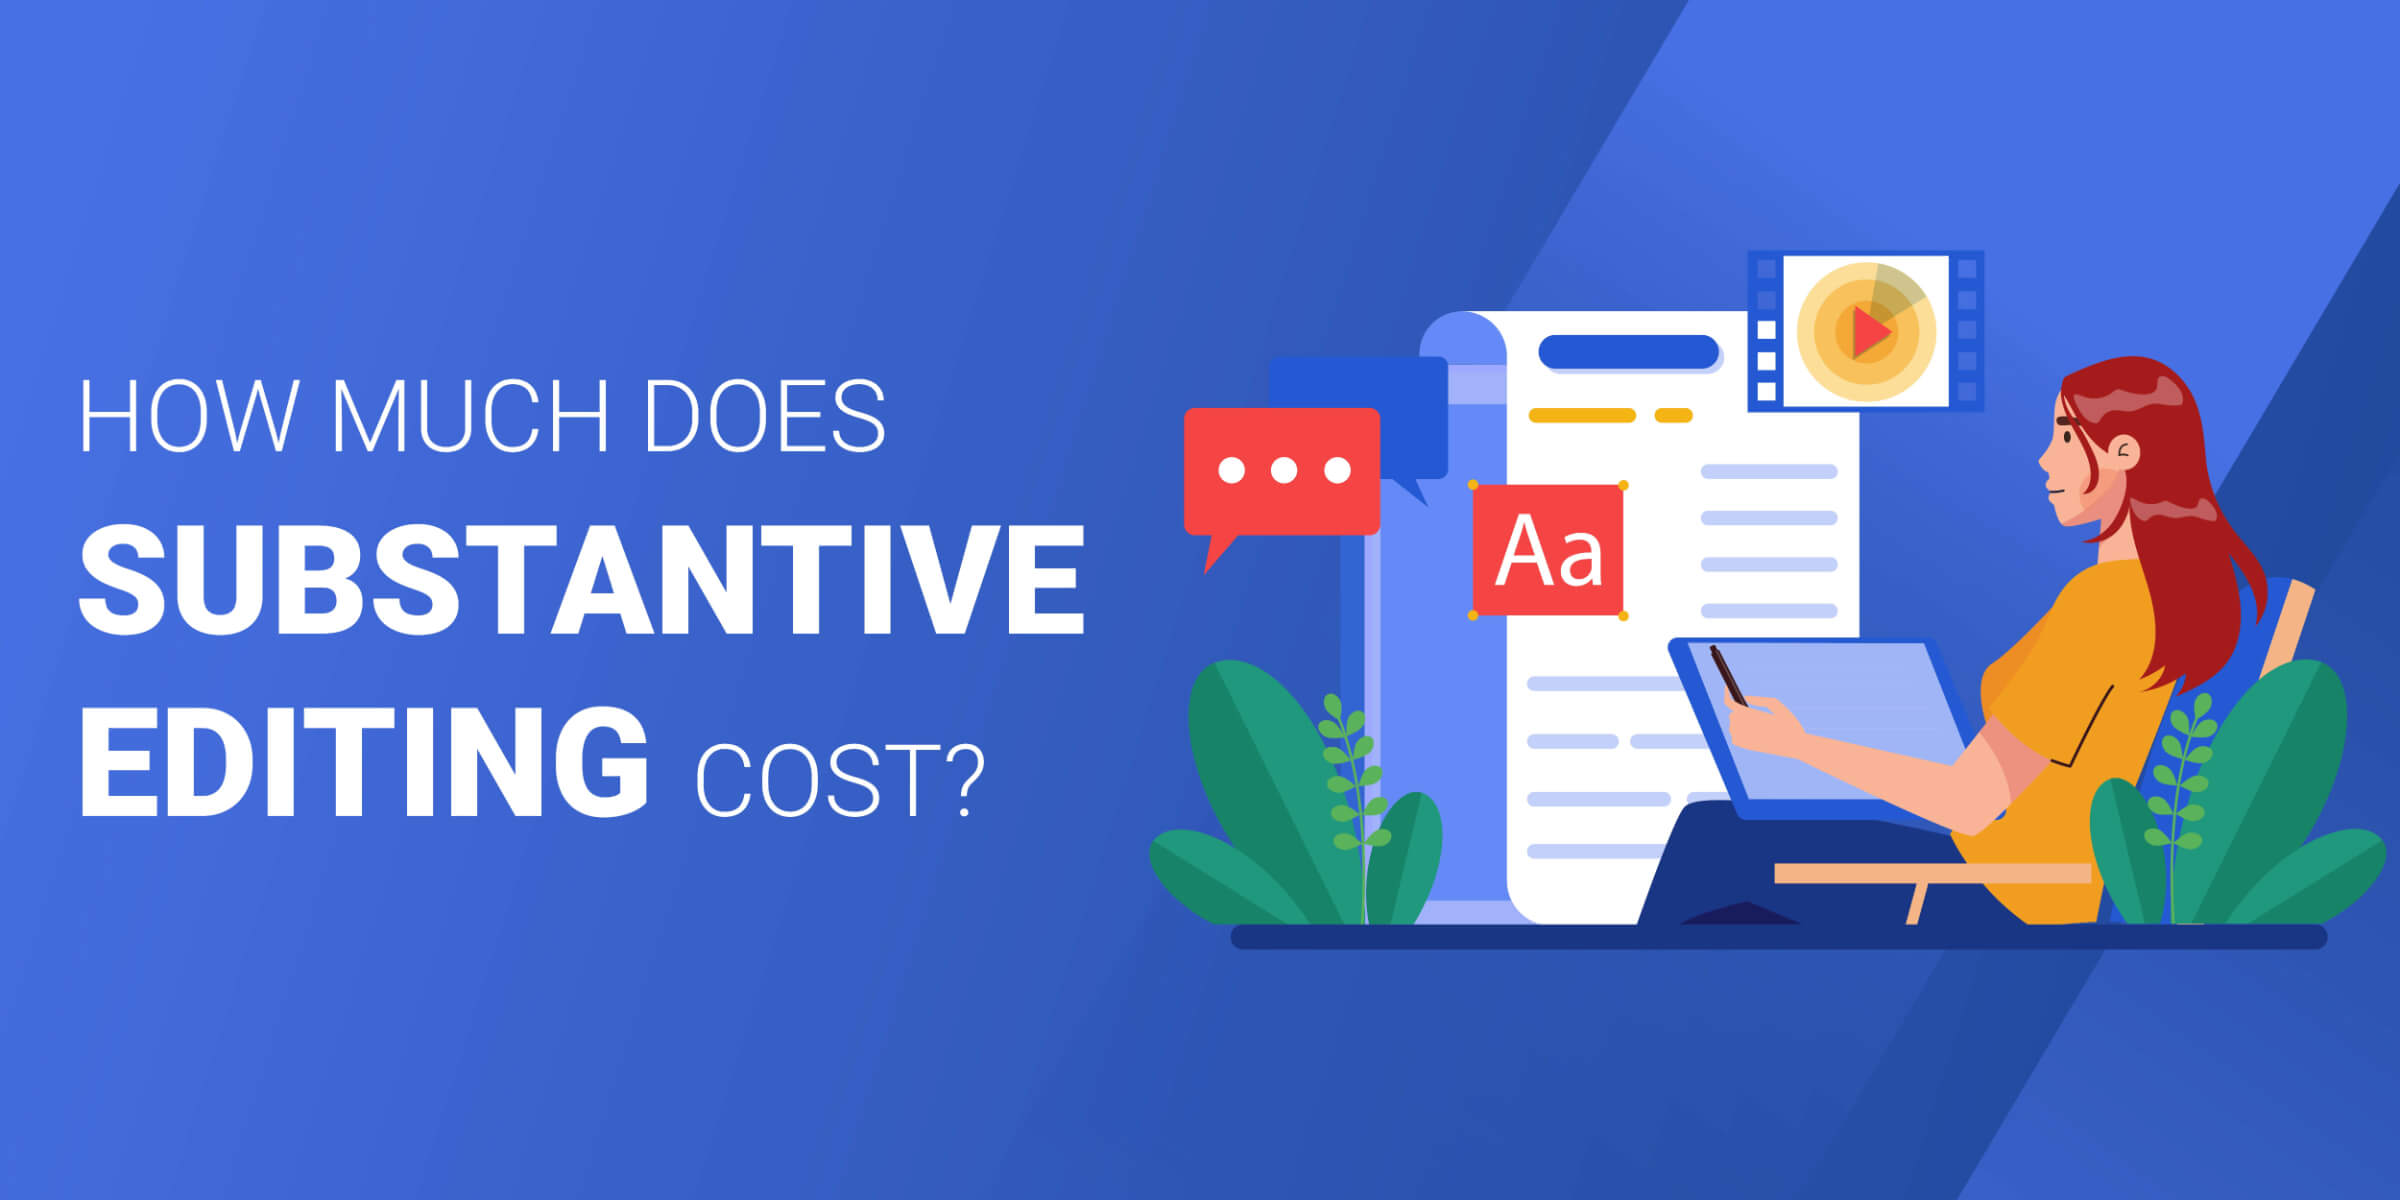 How Much Does Substantive Editing Cost